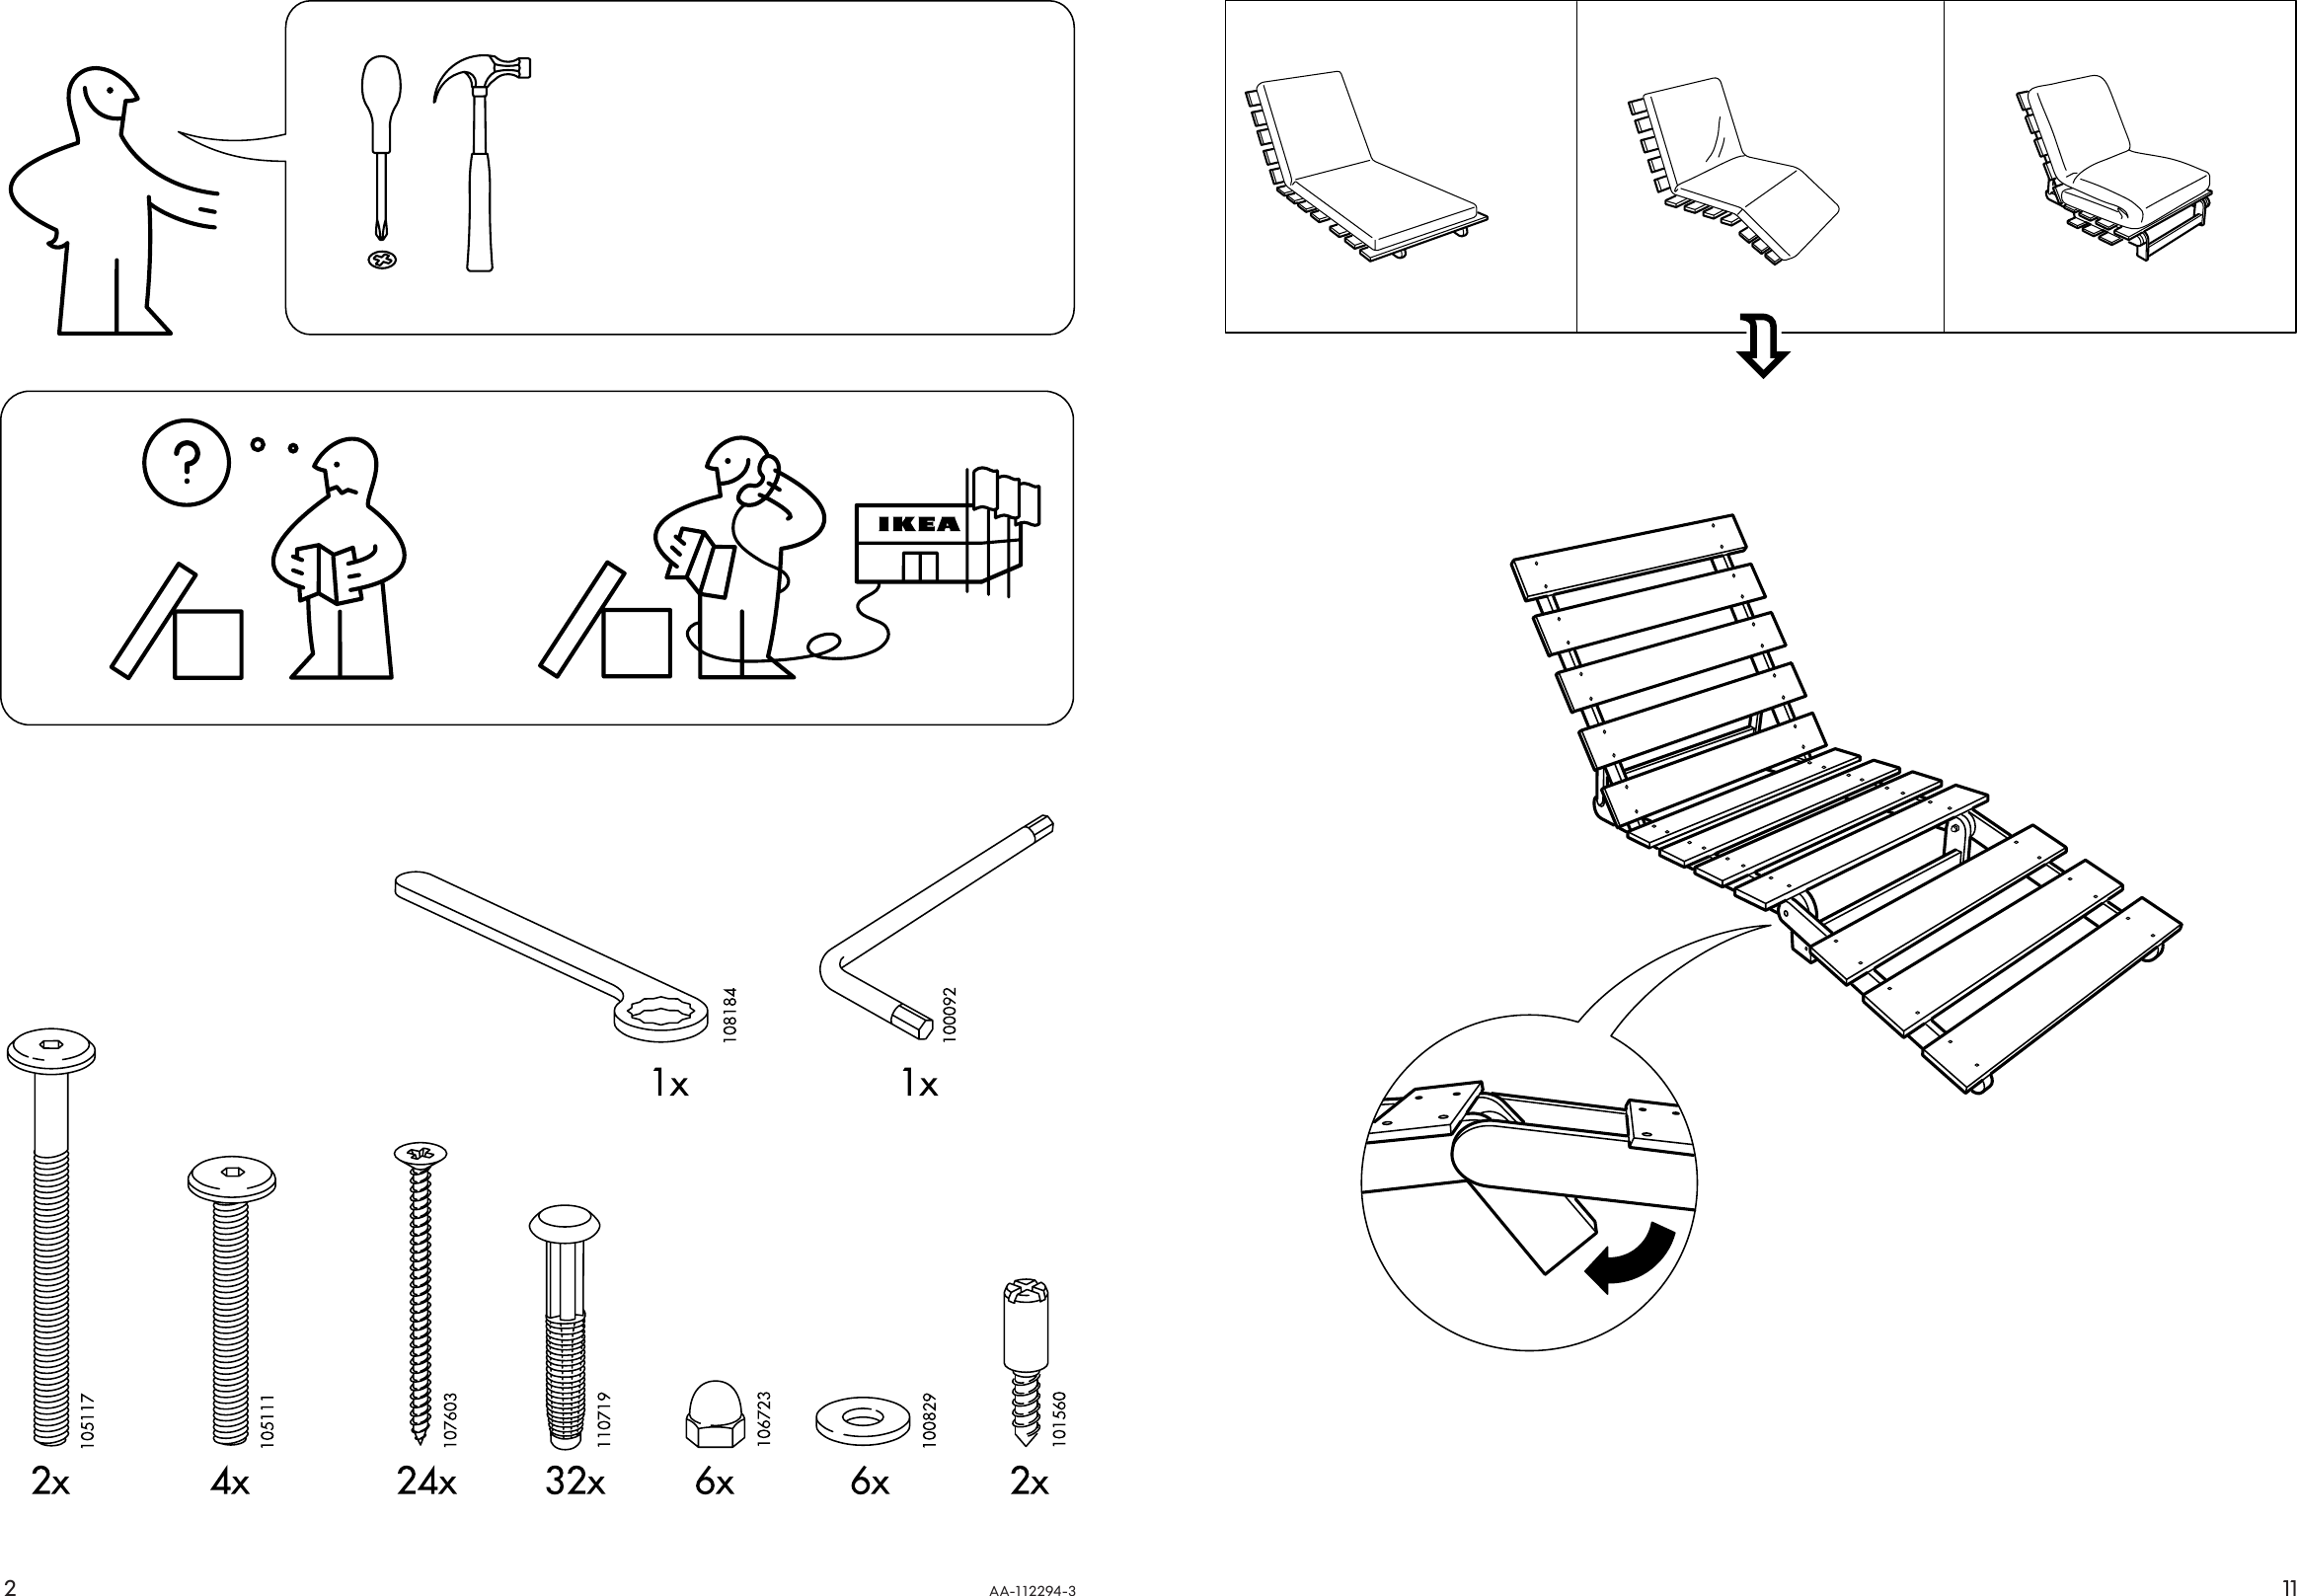 Page 2 of 6 - Ikea Ikea-Grankulla-Futon-Chair-Frame-28X43X32-Assembly-Instruction